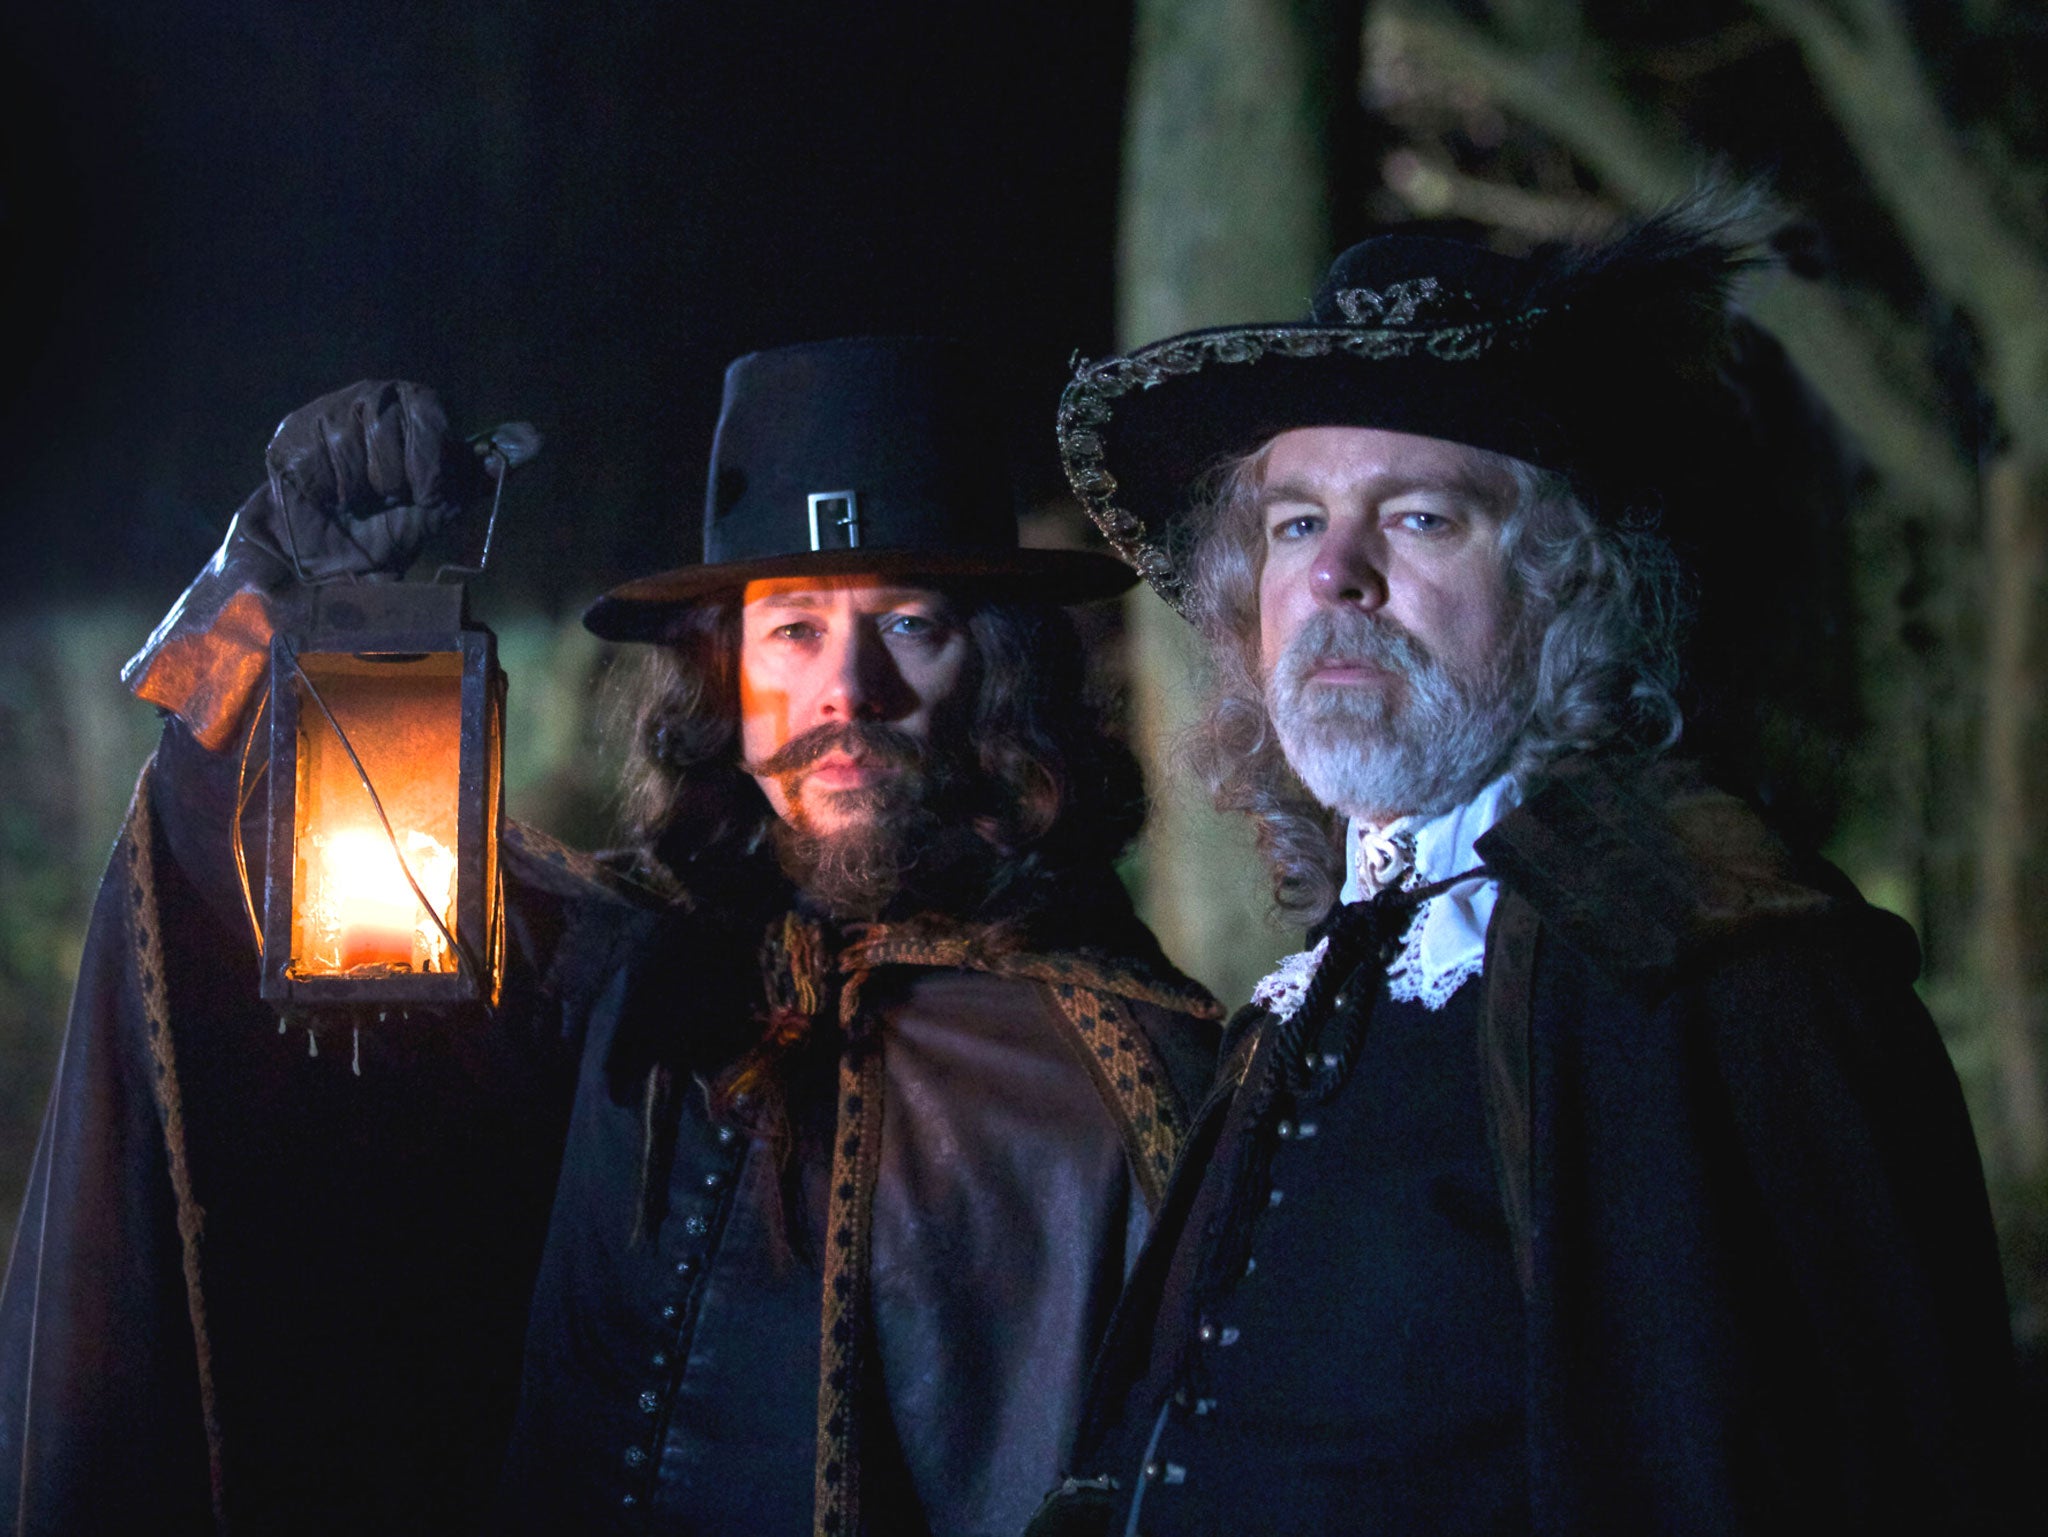 Reece Shearsmith and Steve Pemberton star as a pair of witch hunters in tonight's episode of Inside no. 9